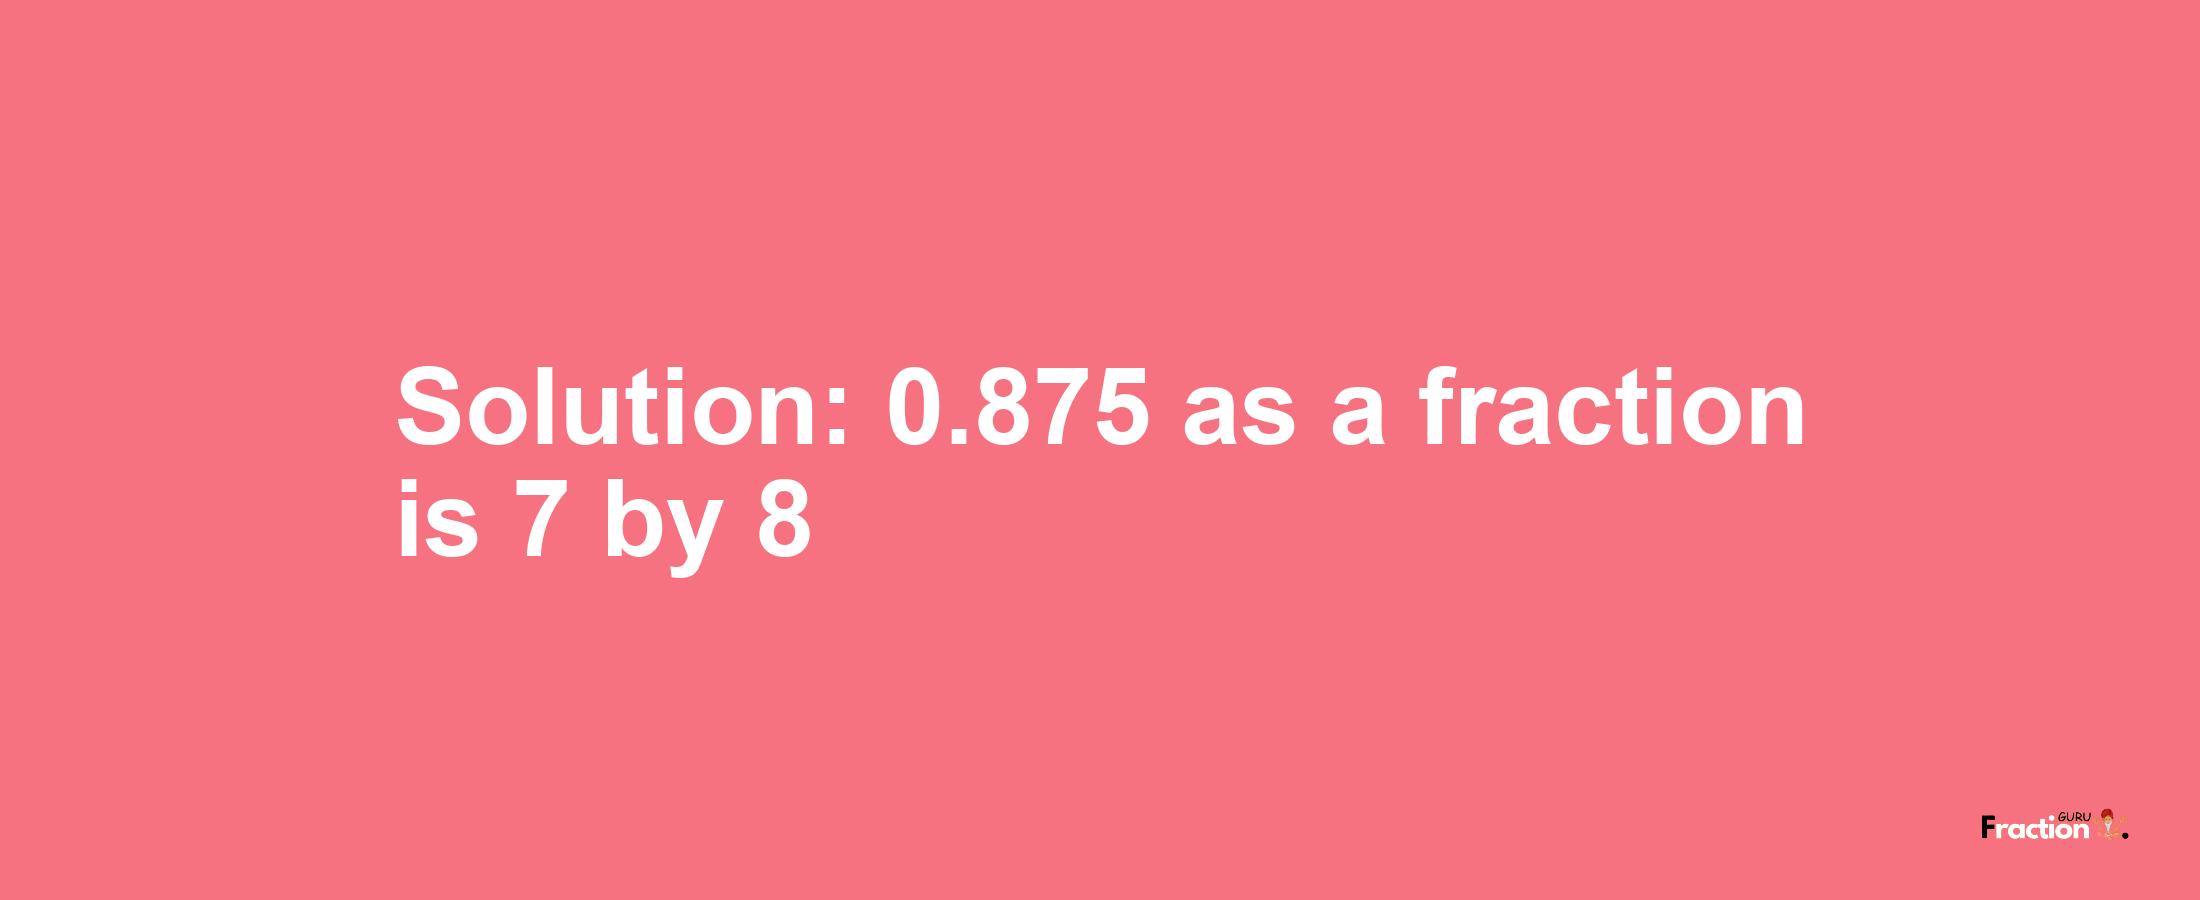 Solution:0.875 as a fraction is 7/8